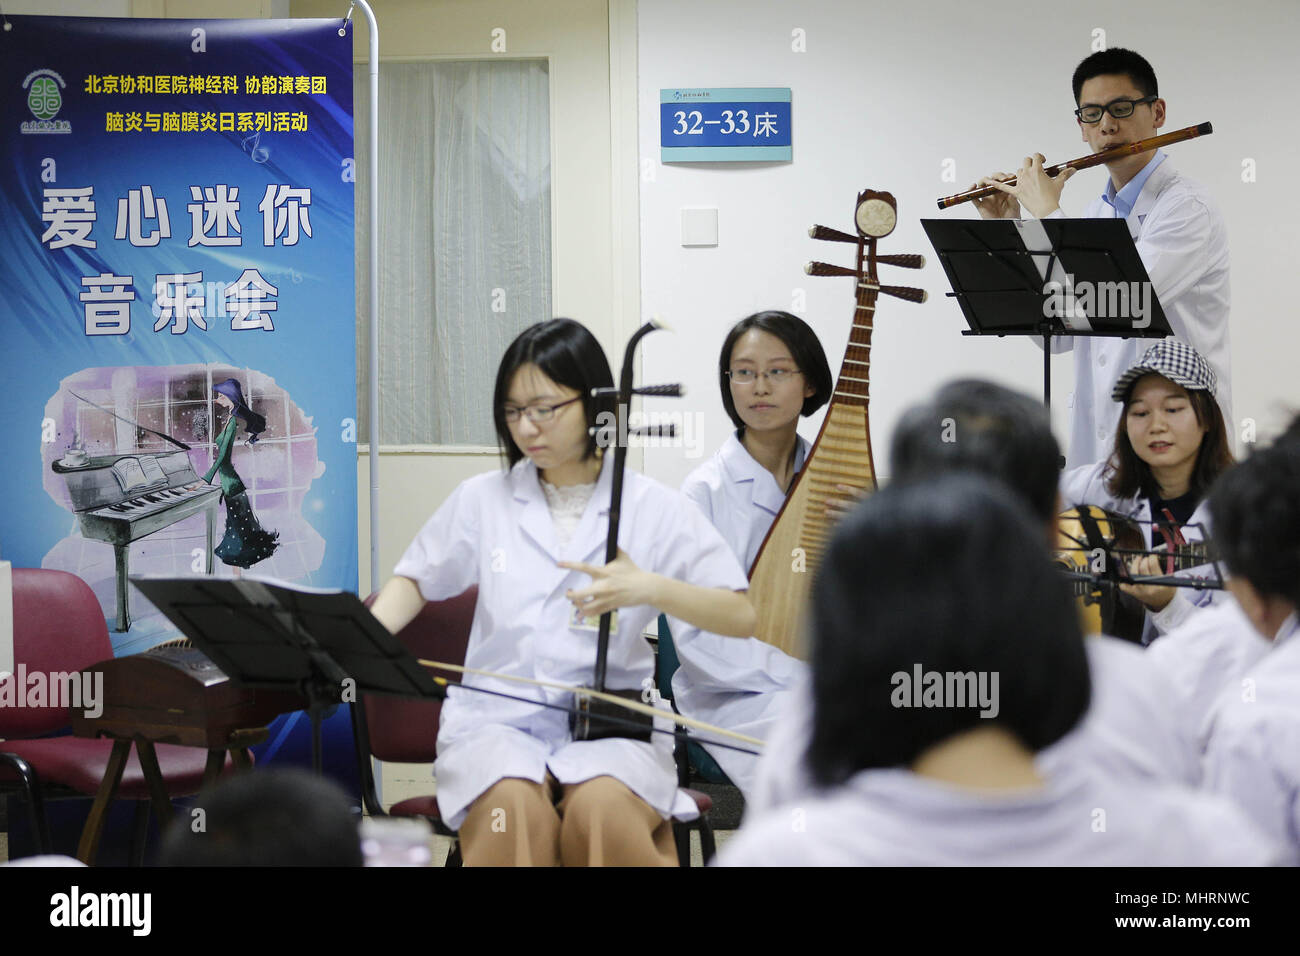 (180503) -- BEIJING, May 3, 2018 (Xinhua) -  Members of the 'Xieyun' orchestra perform in a ward of Peking Union Medical College Hospital (PUMCH) in Beijing, capital of China, April 23, 2018. In 2015, PUMCH doctors and Peking Union Medical College students launched the 'Xieyun' orchestra. Every month, members of 'Xieyun' would voluntarily stage one or two musical performances for patients, their families, and other medical workers. The orchestra was widely appreciated by its audiences for its performances and the members' concern and love for the patients. (Xinhua/Zhang Yuwei) (lb) (zt) Stock Photo